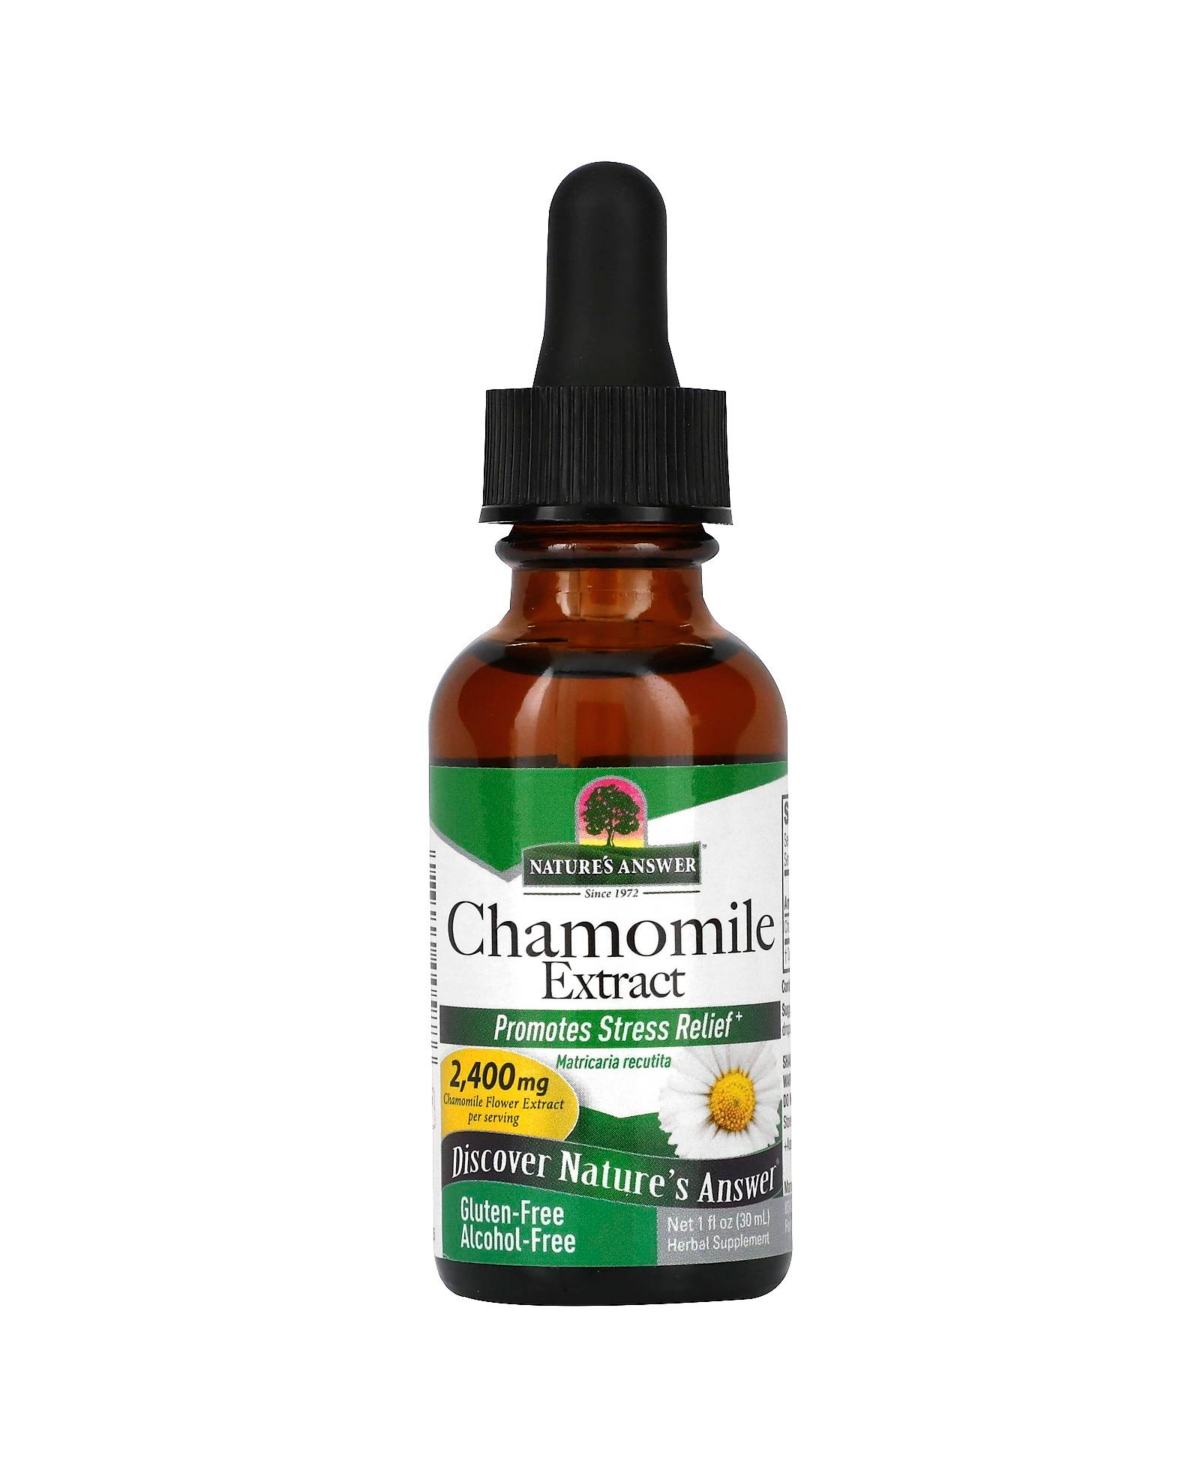 Chamomile Extract Alcohol Free 2 400 mg 1 fl oz (30 ml) (1 - 200 mg per - Assorted Pre-pack (See Table